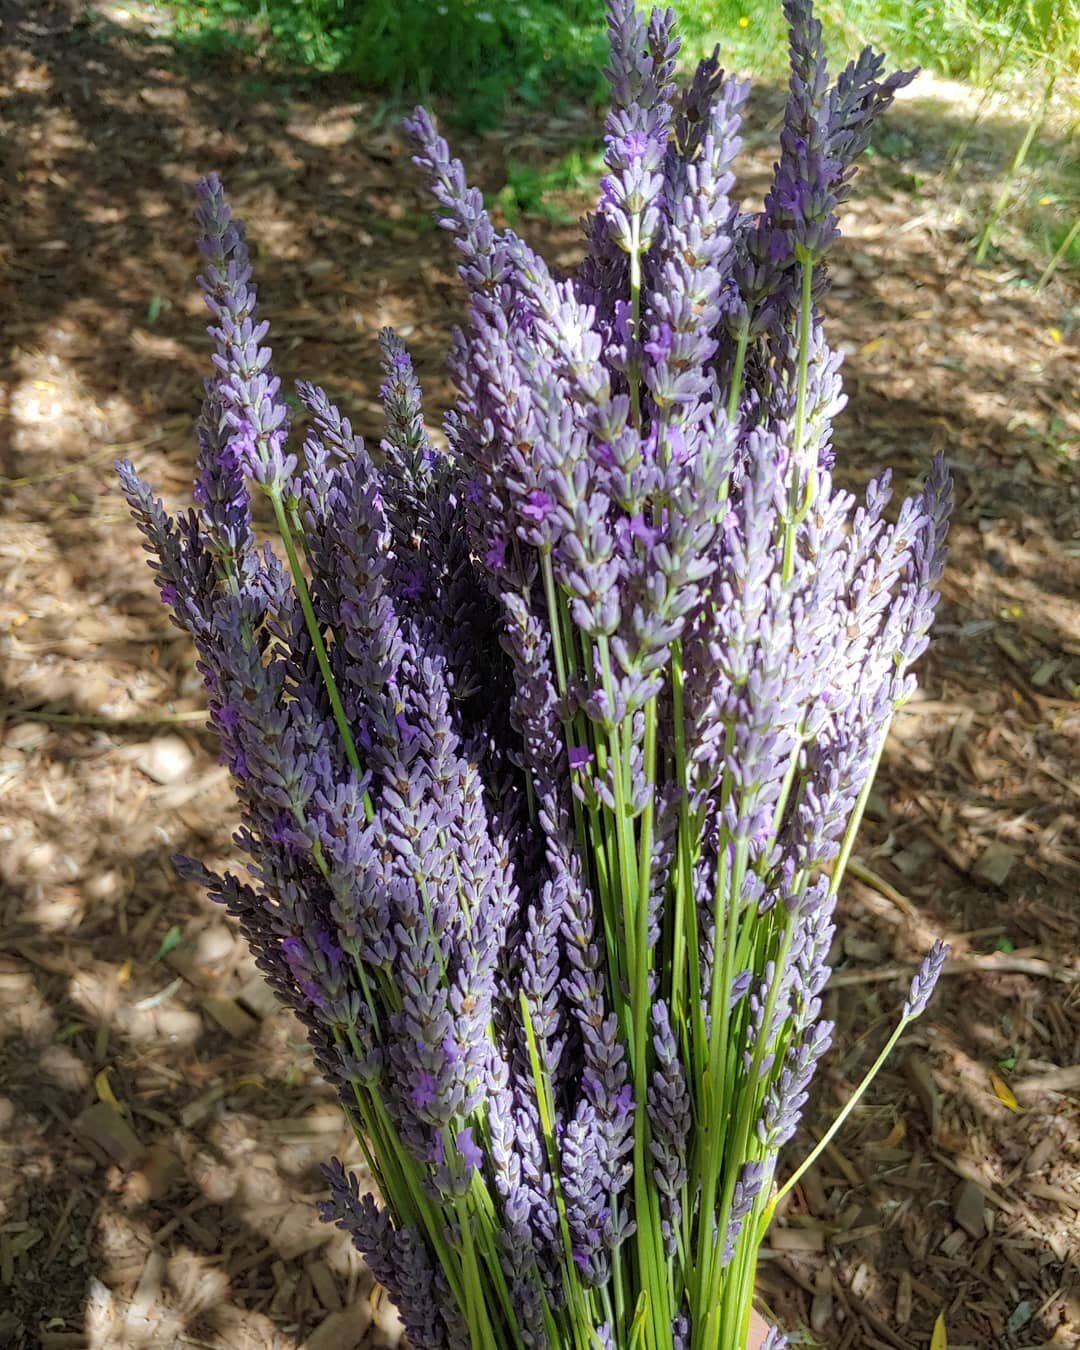 The Grosso lavender is ready now. This is a long stemmed flower with a dark purple color. This has the traditional scent that most people associate with lavender. Enjoy !